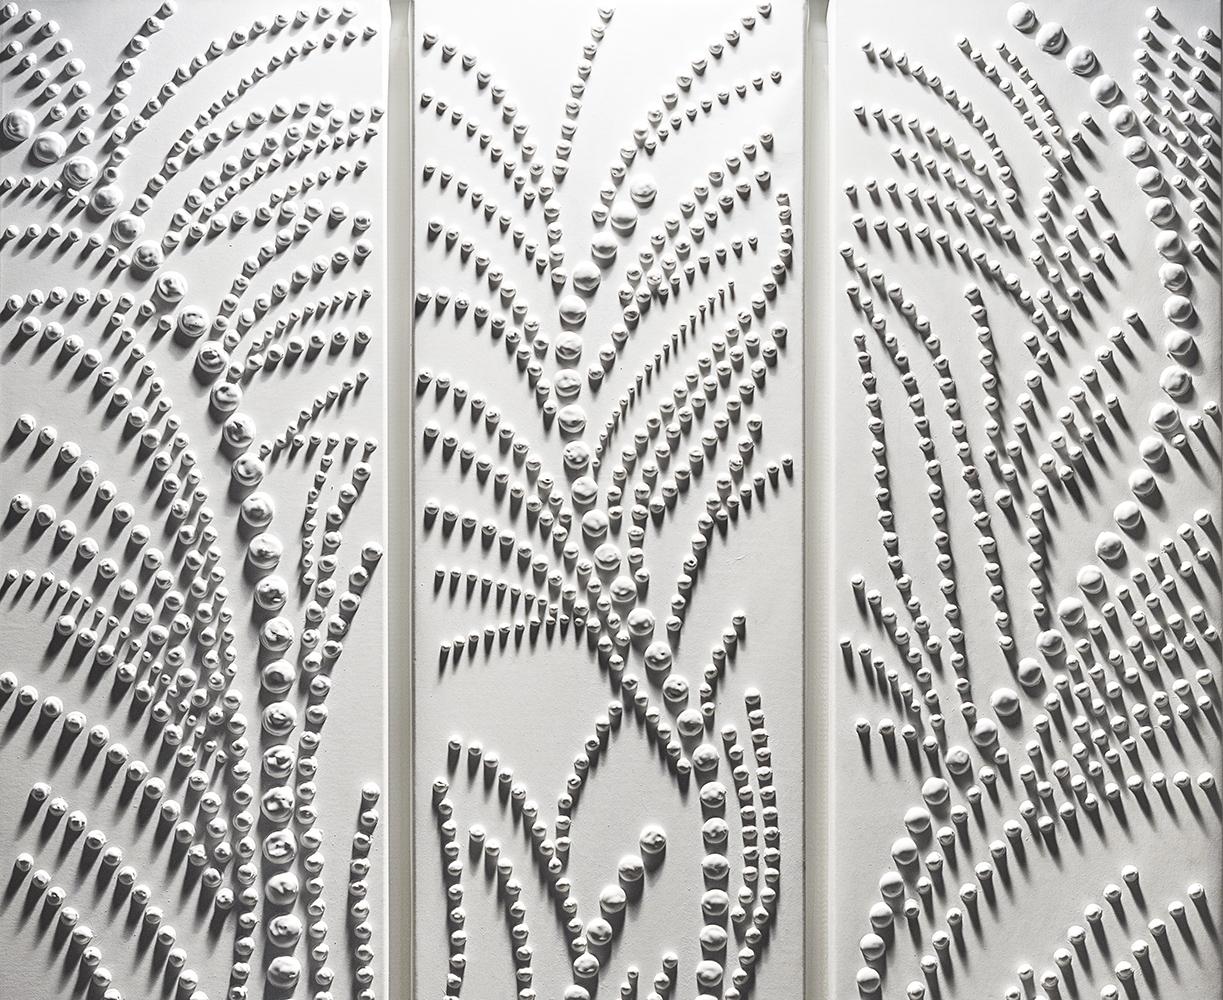 Vegetal, monochrome painting by contemporary artist Jane Puylagarde.
Acrylic on canvas, 156 cm x 81 cm (triptych composed of three panels).
Undulating shapes of flows and swirls move up or down in a vertical dynamic. Every shape comprises a series